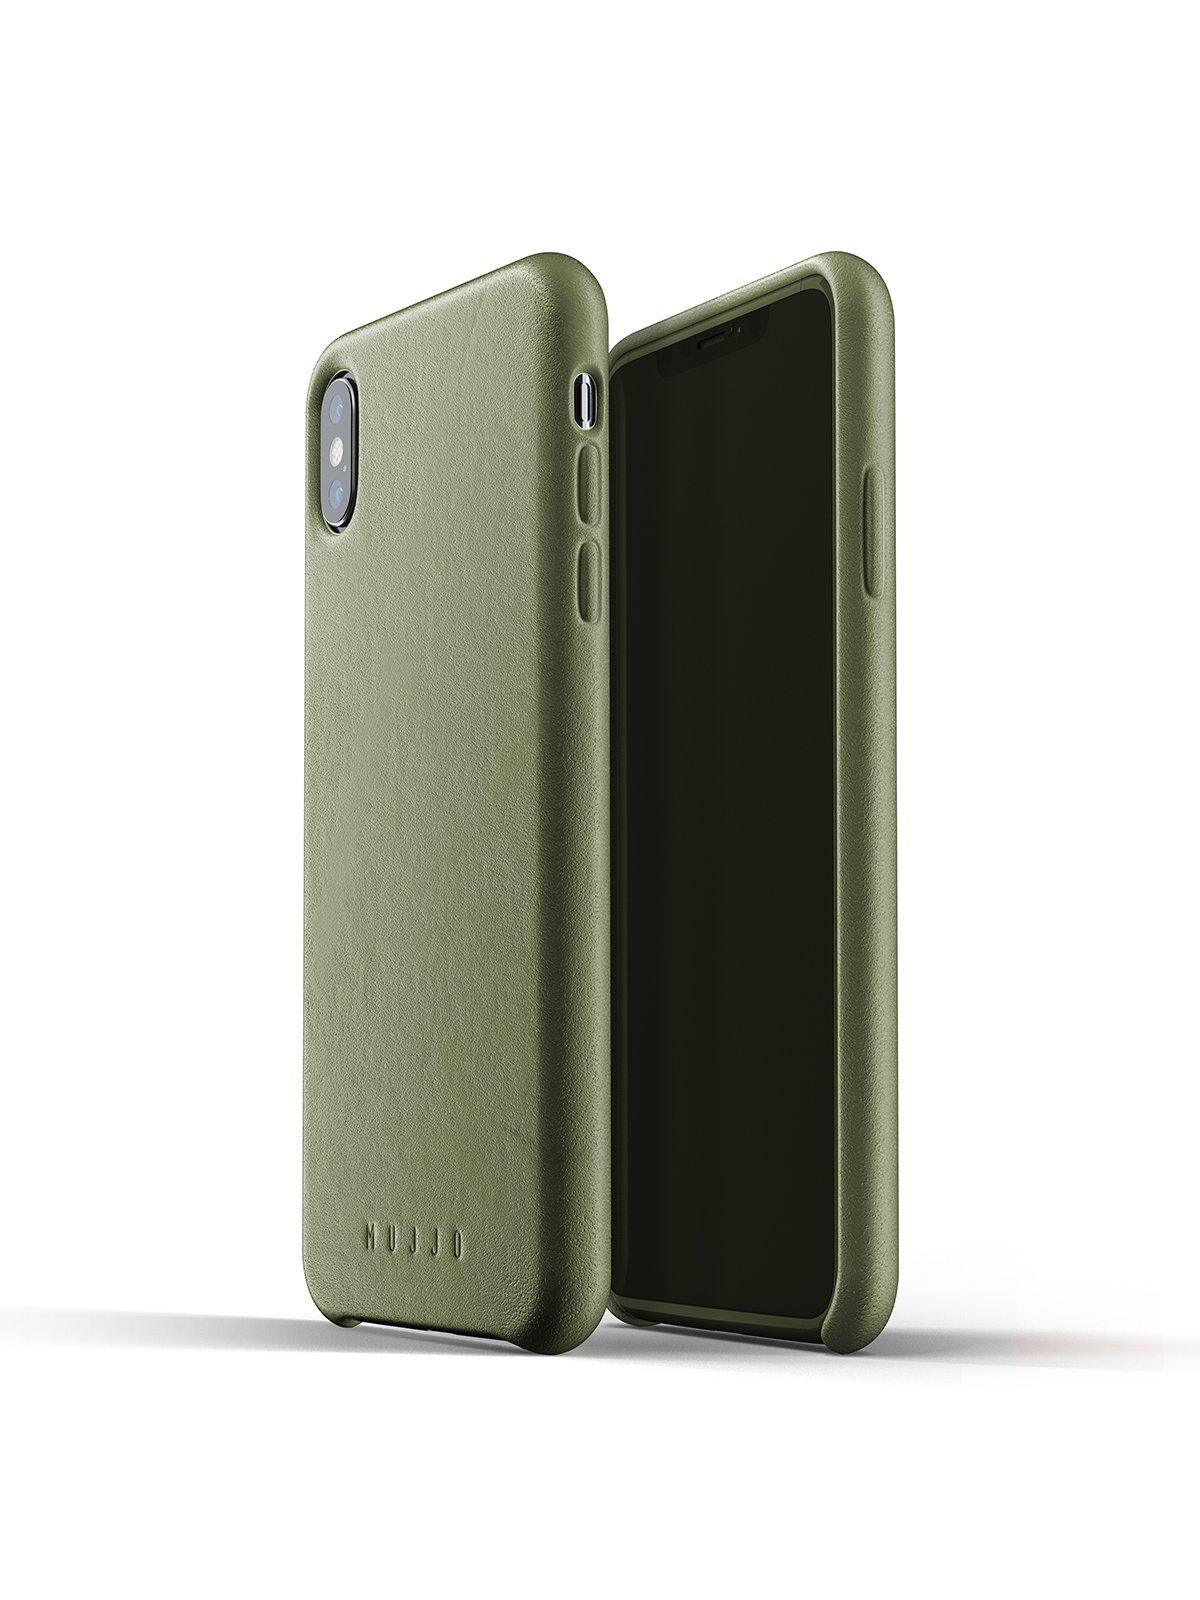 Mujjo Full Leather Case for iPhone XS Max Olive - MORE by Morello Indonesia